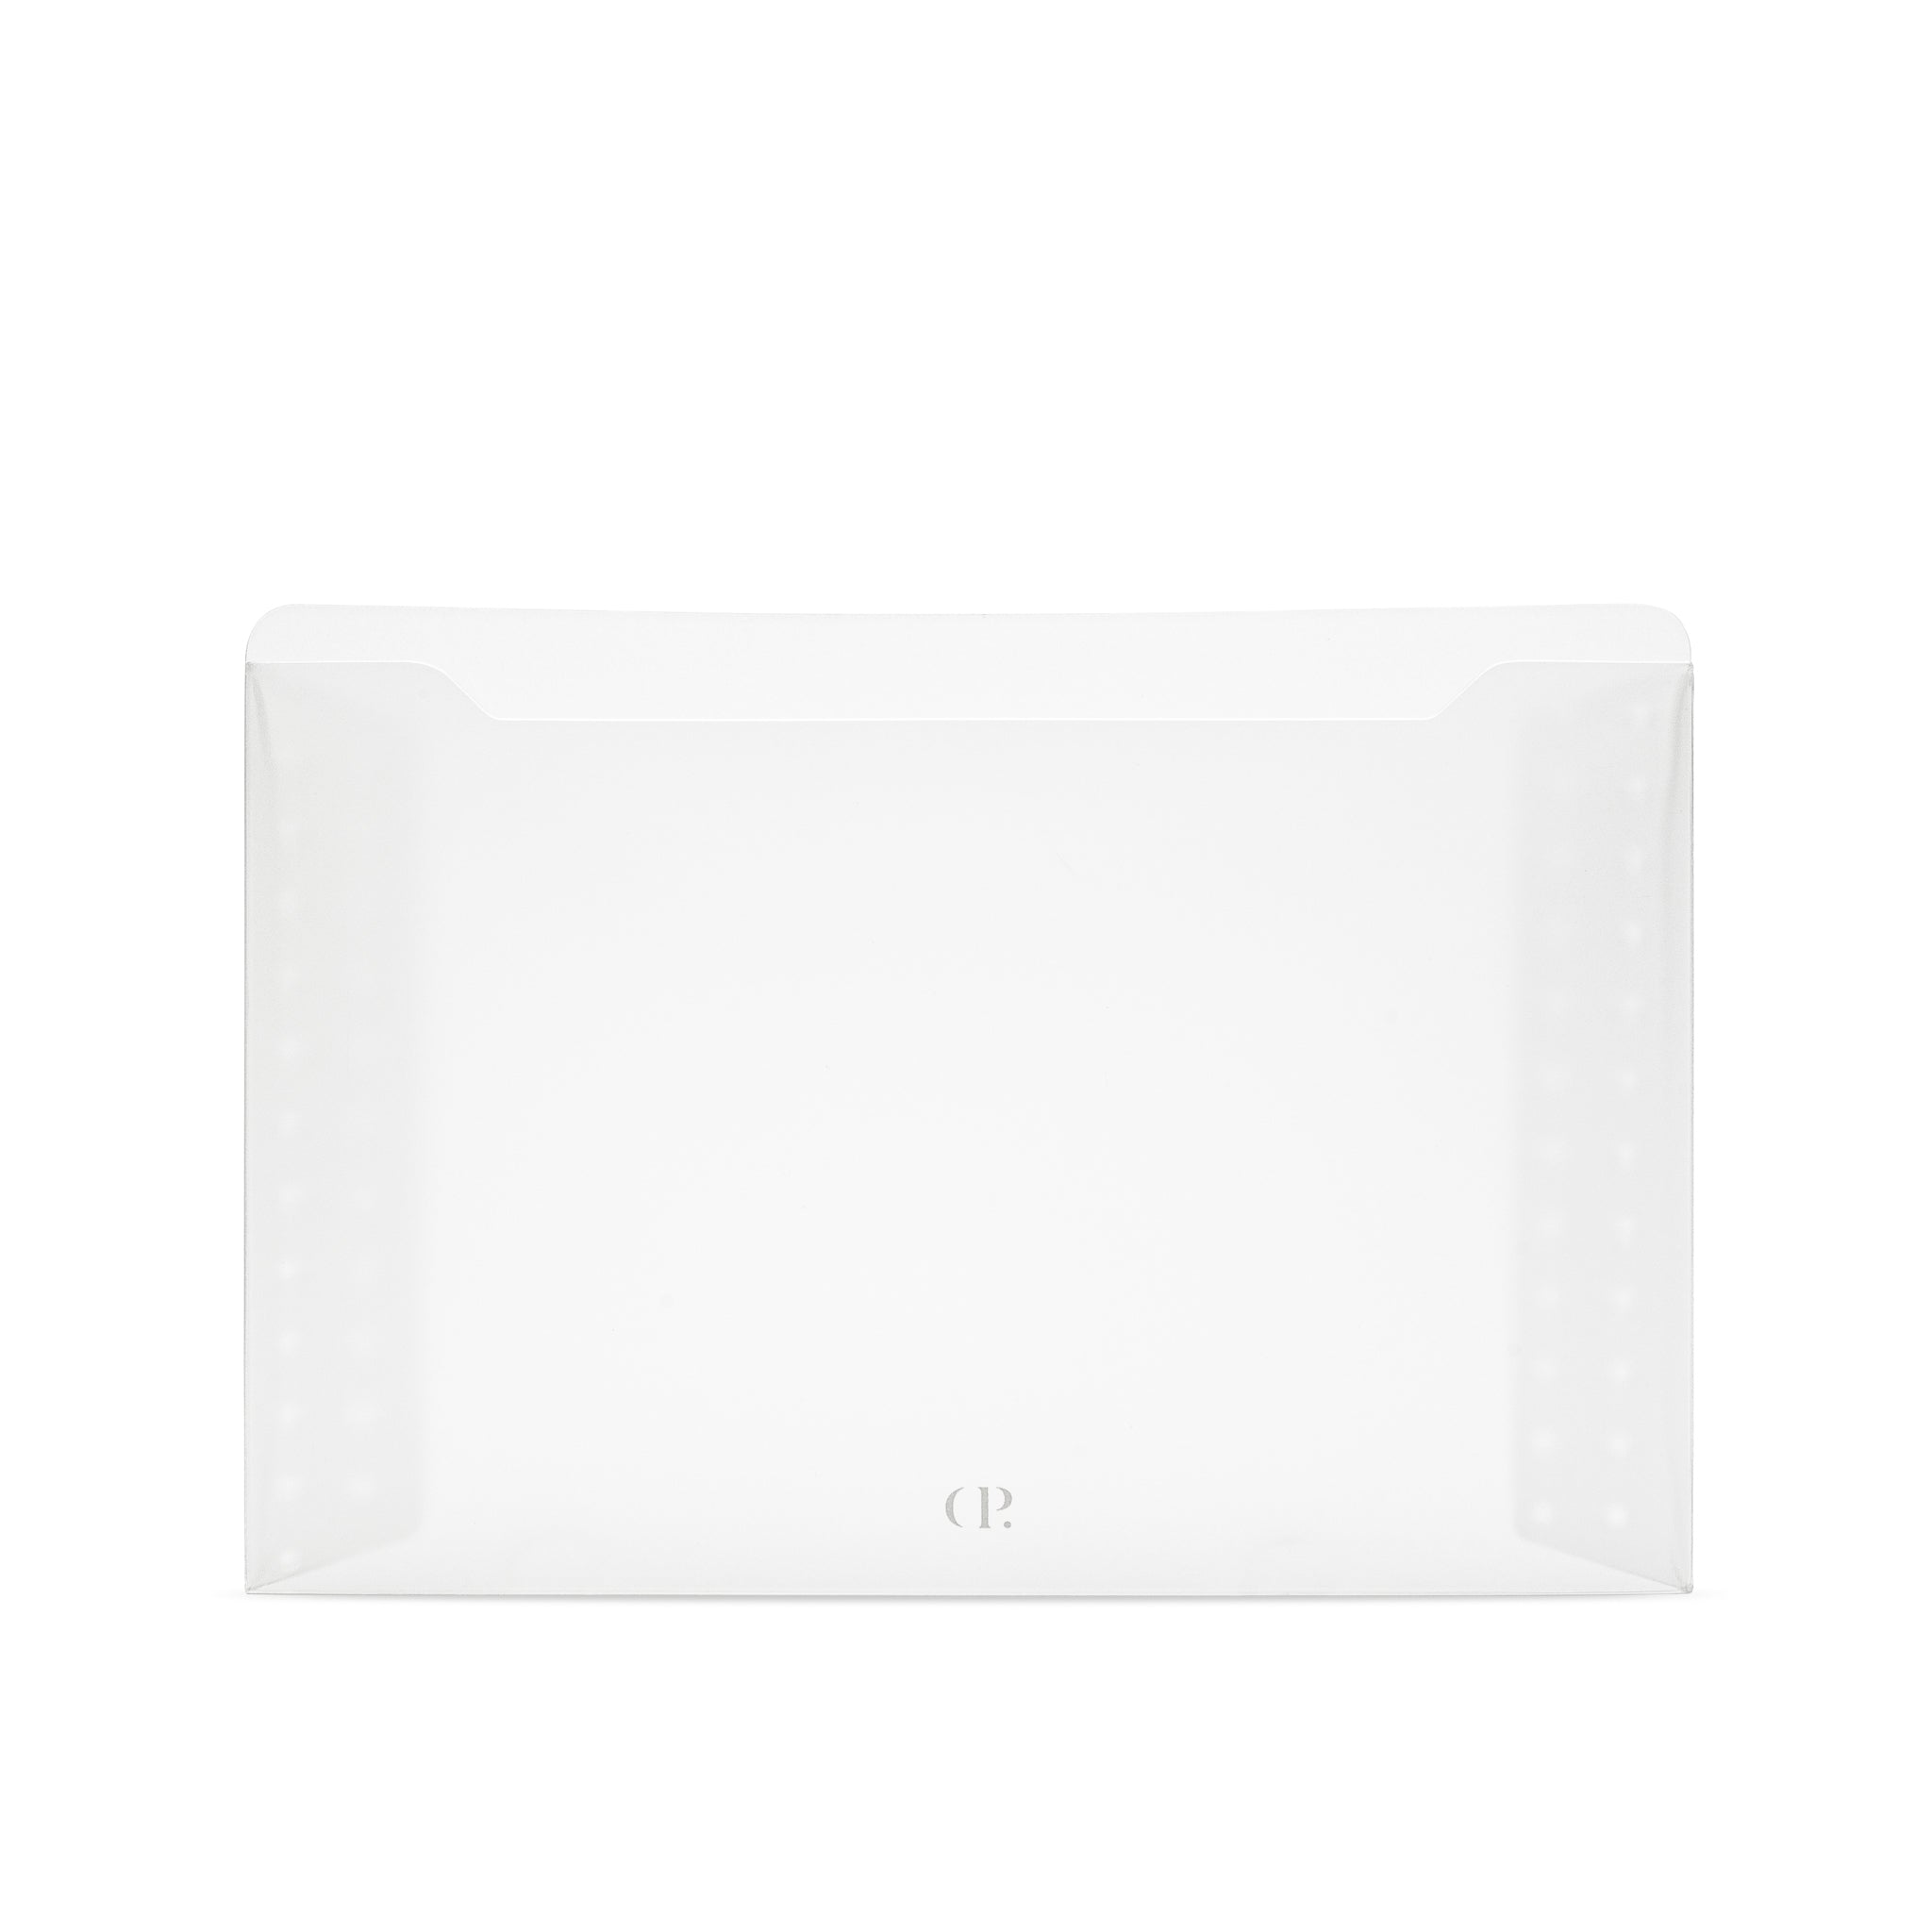 HK Luxe Personal A6 Cash Envelopes, Set of 3